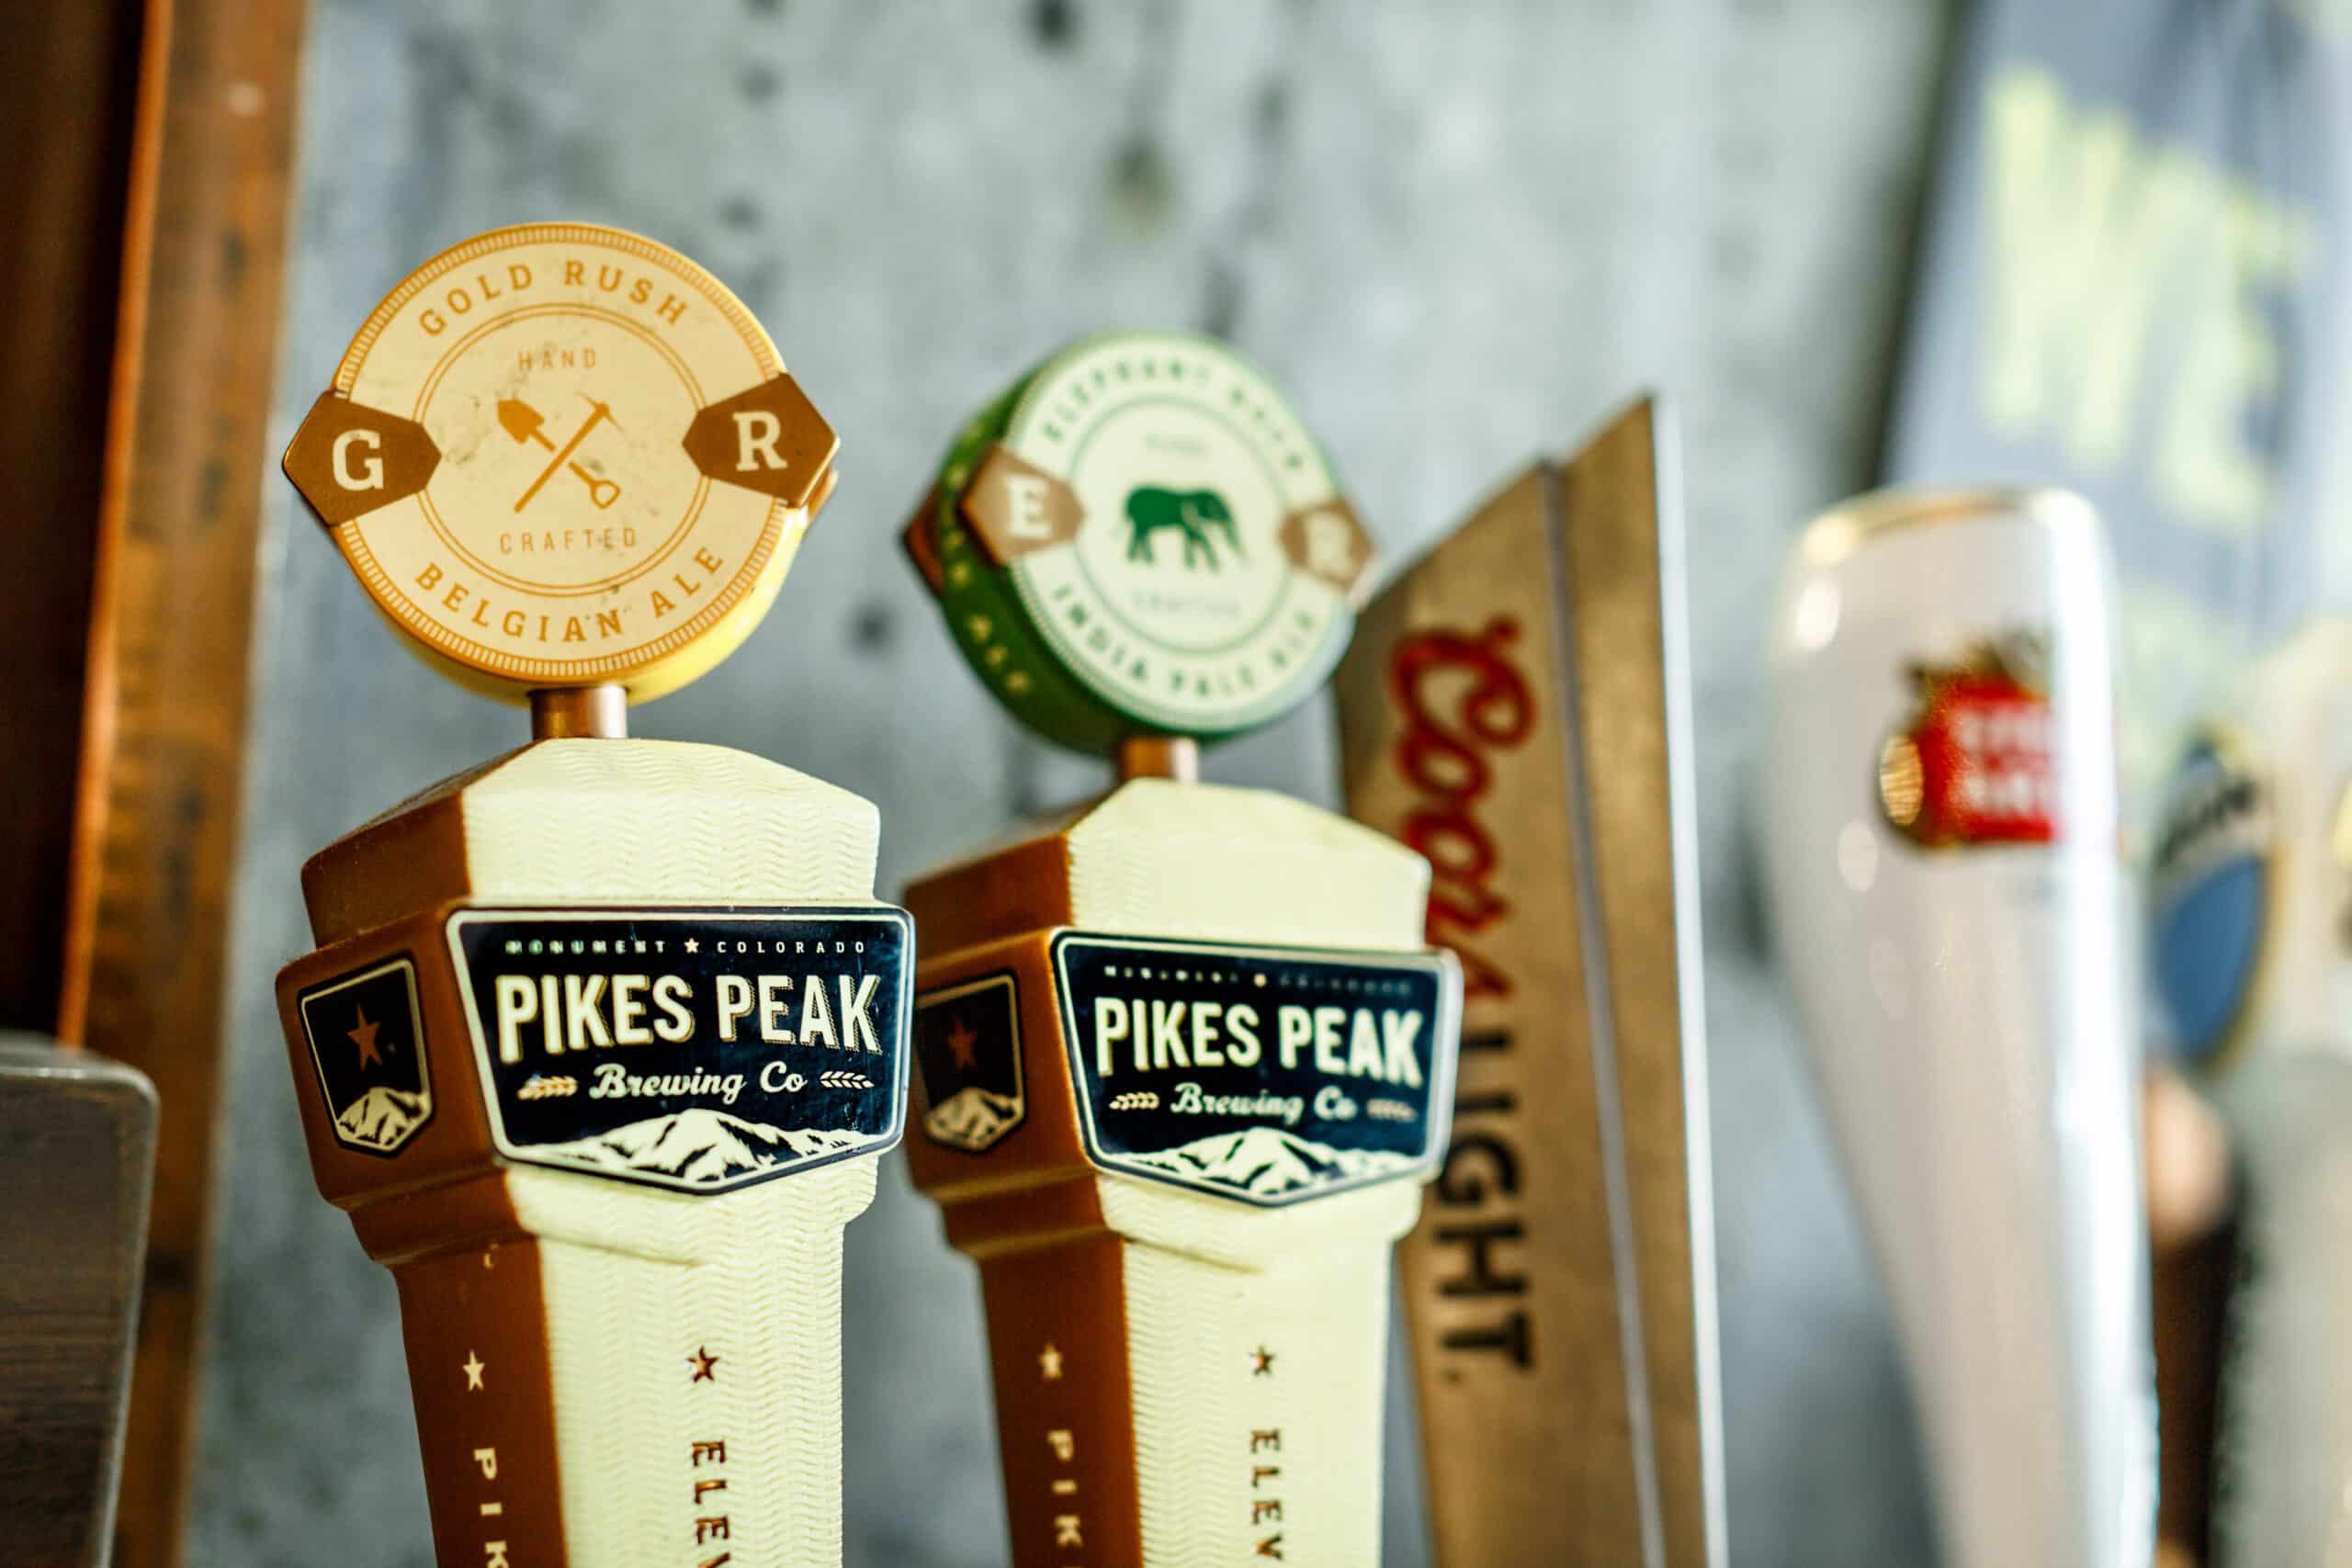 photo of beer taps at a bar for Pikes Peak brewing